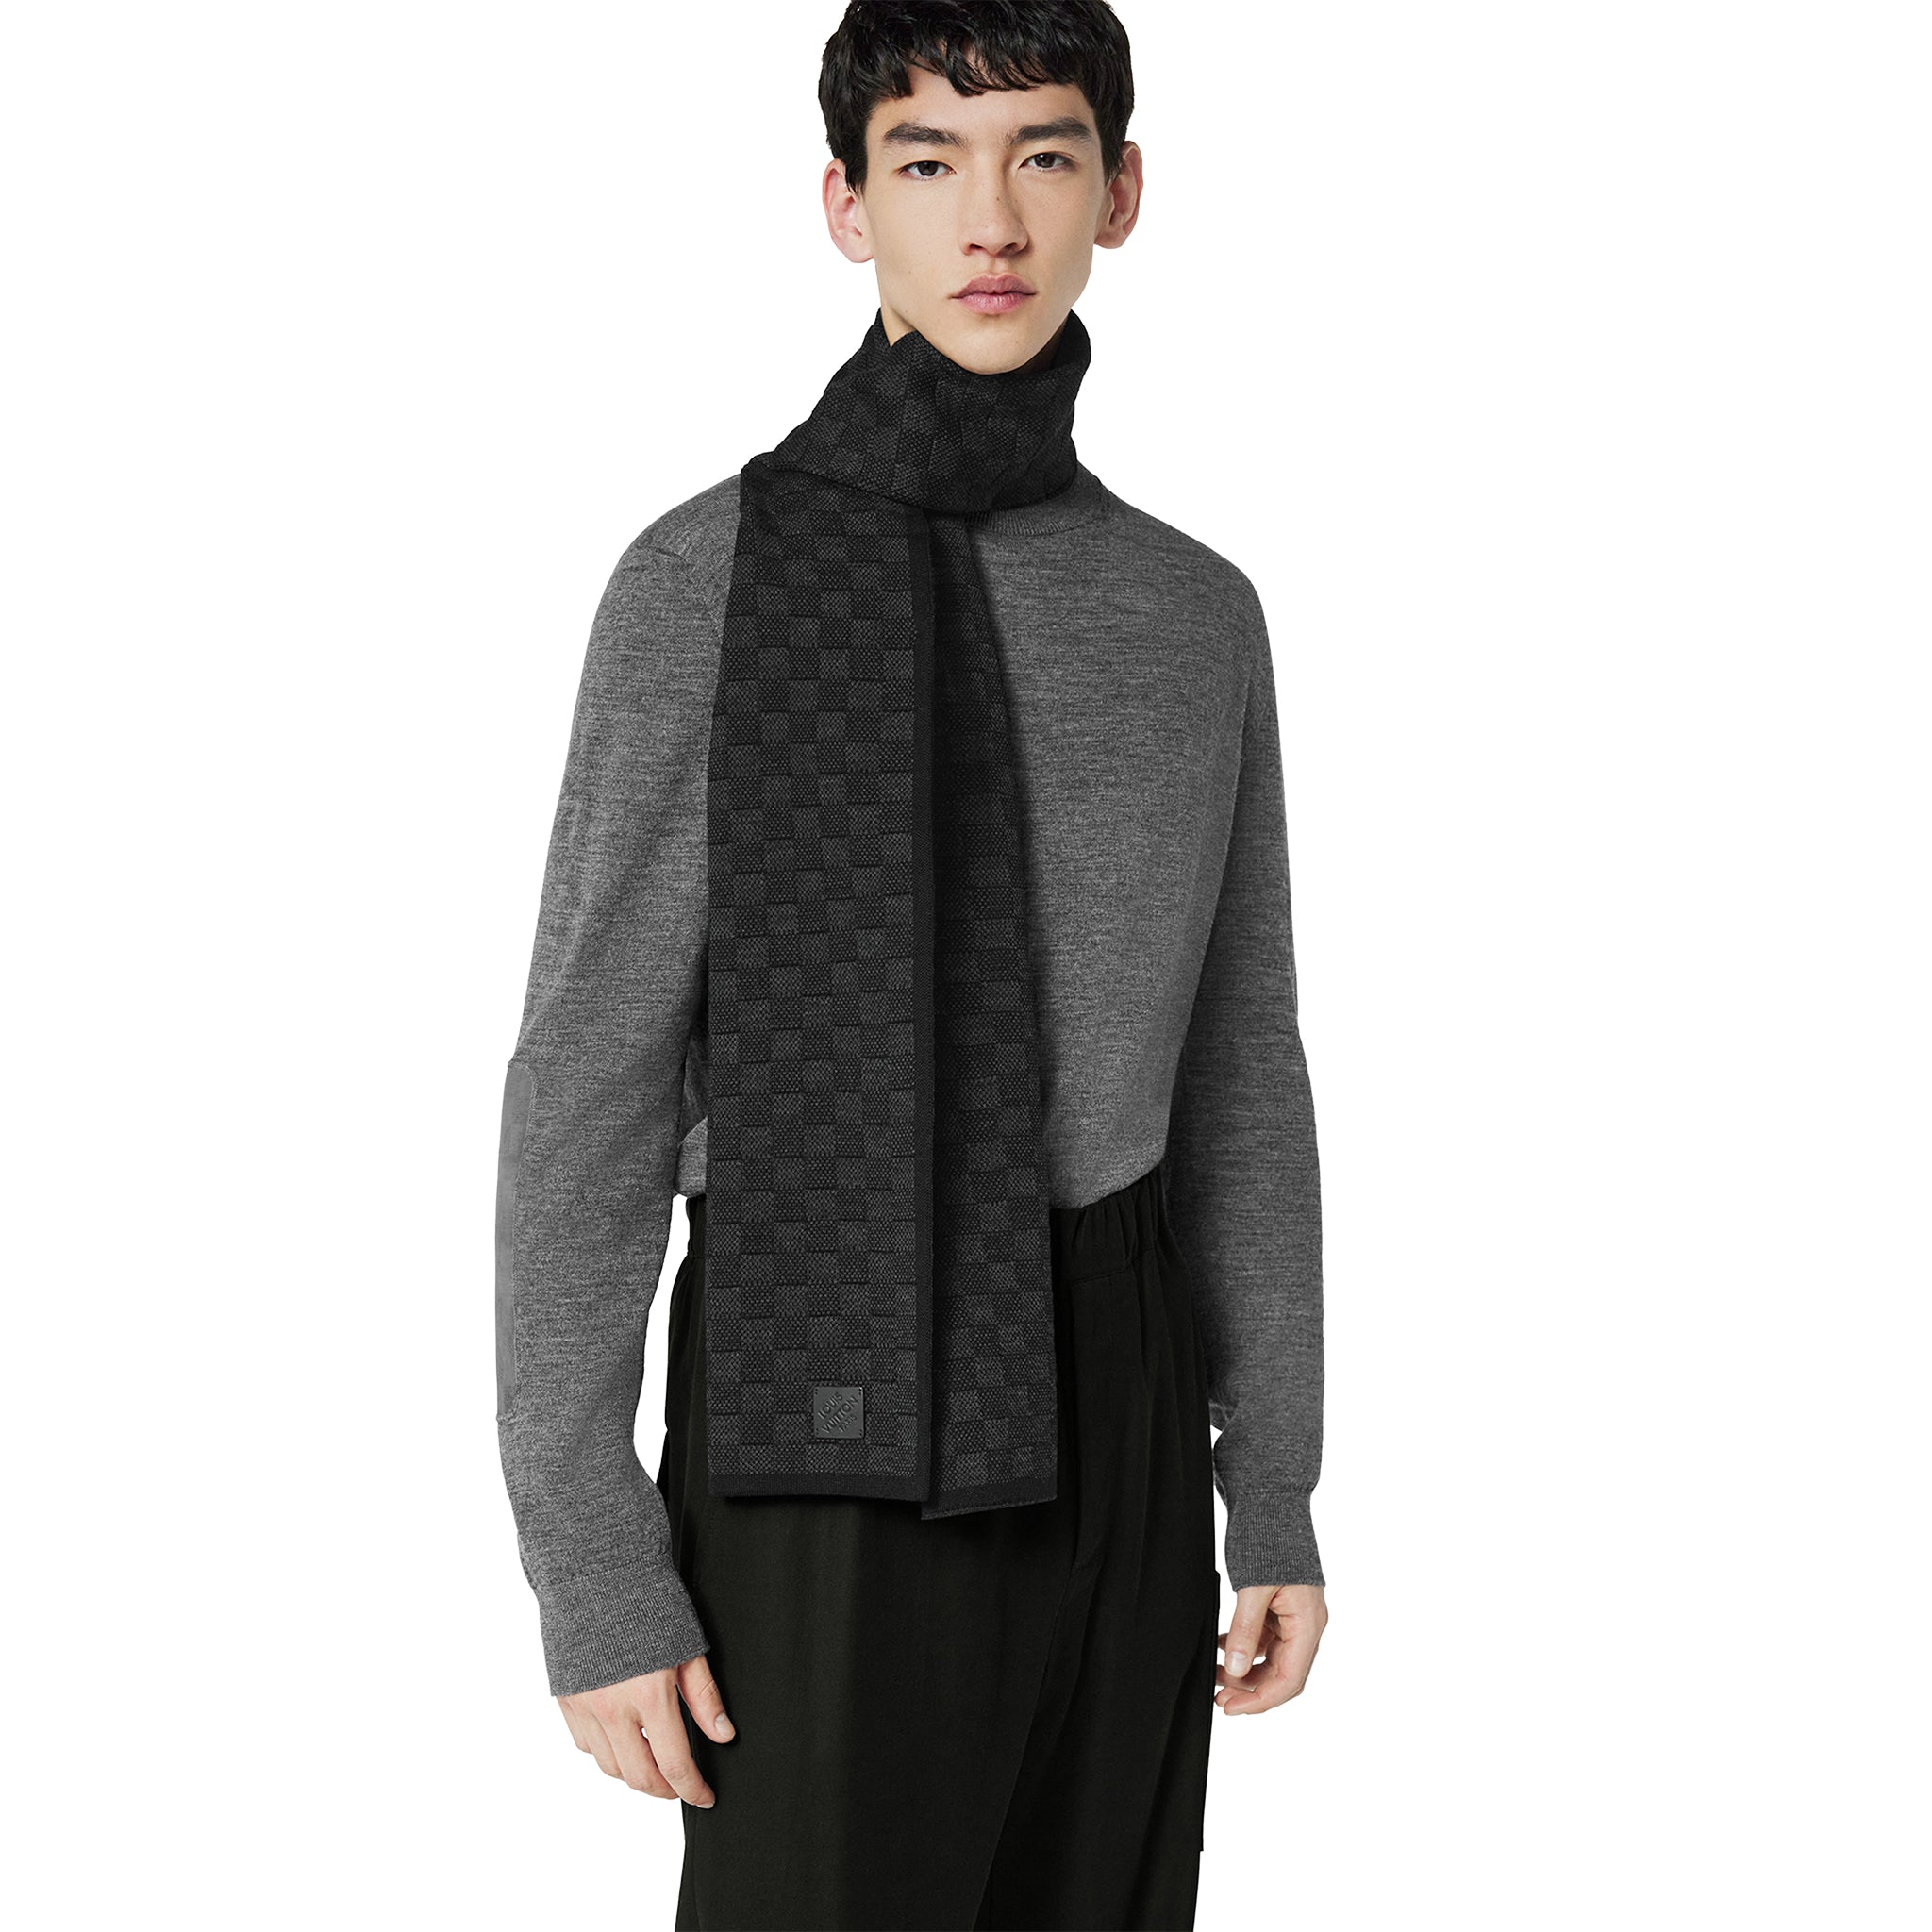 Model scarf view of Louis Vuitton Néo Petit Damier Anthracite Beanie & Scarf NVPROD3920087V